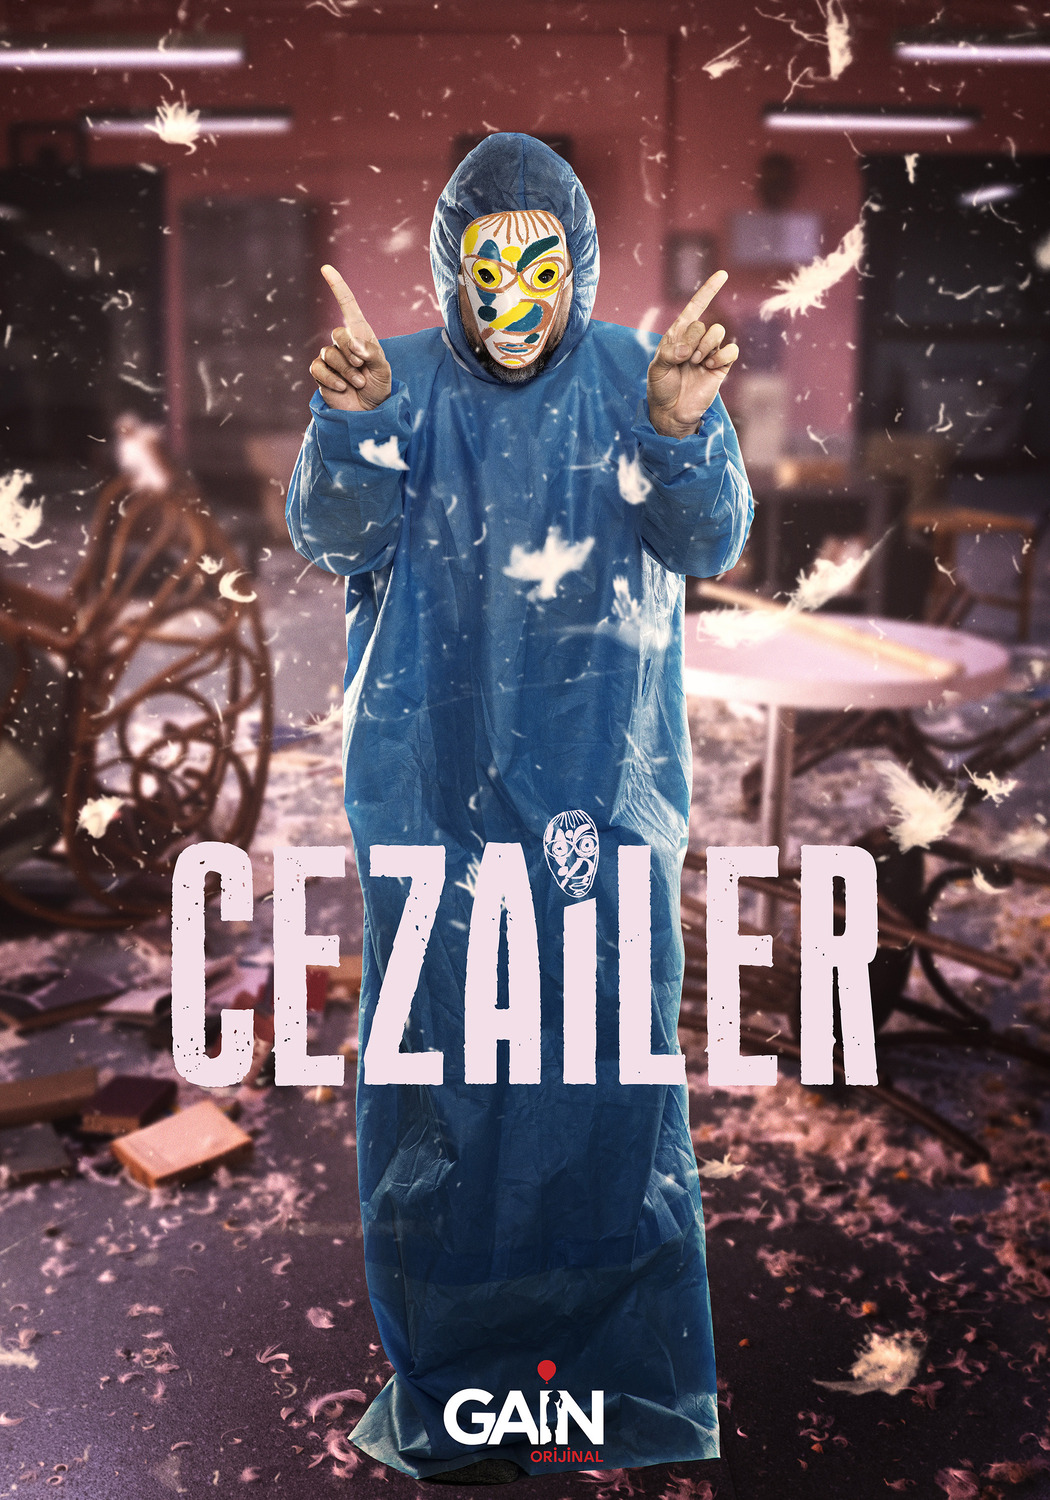 Extra Large TV Poster Image for Cezailer (#2 of 3)